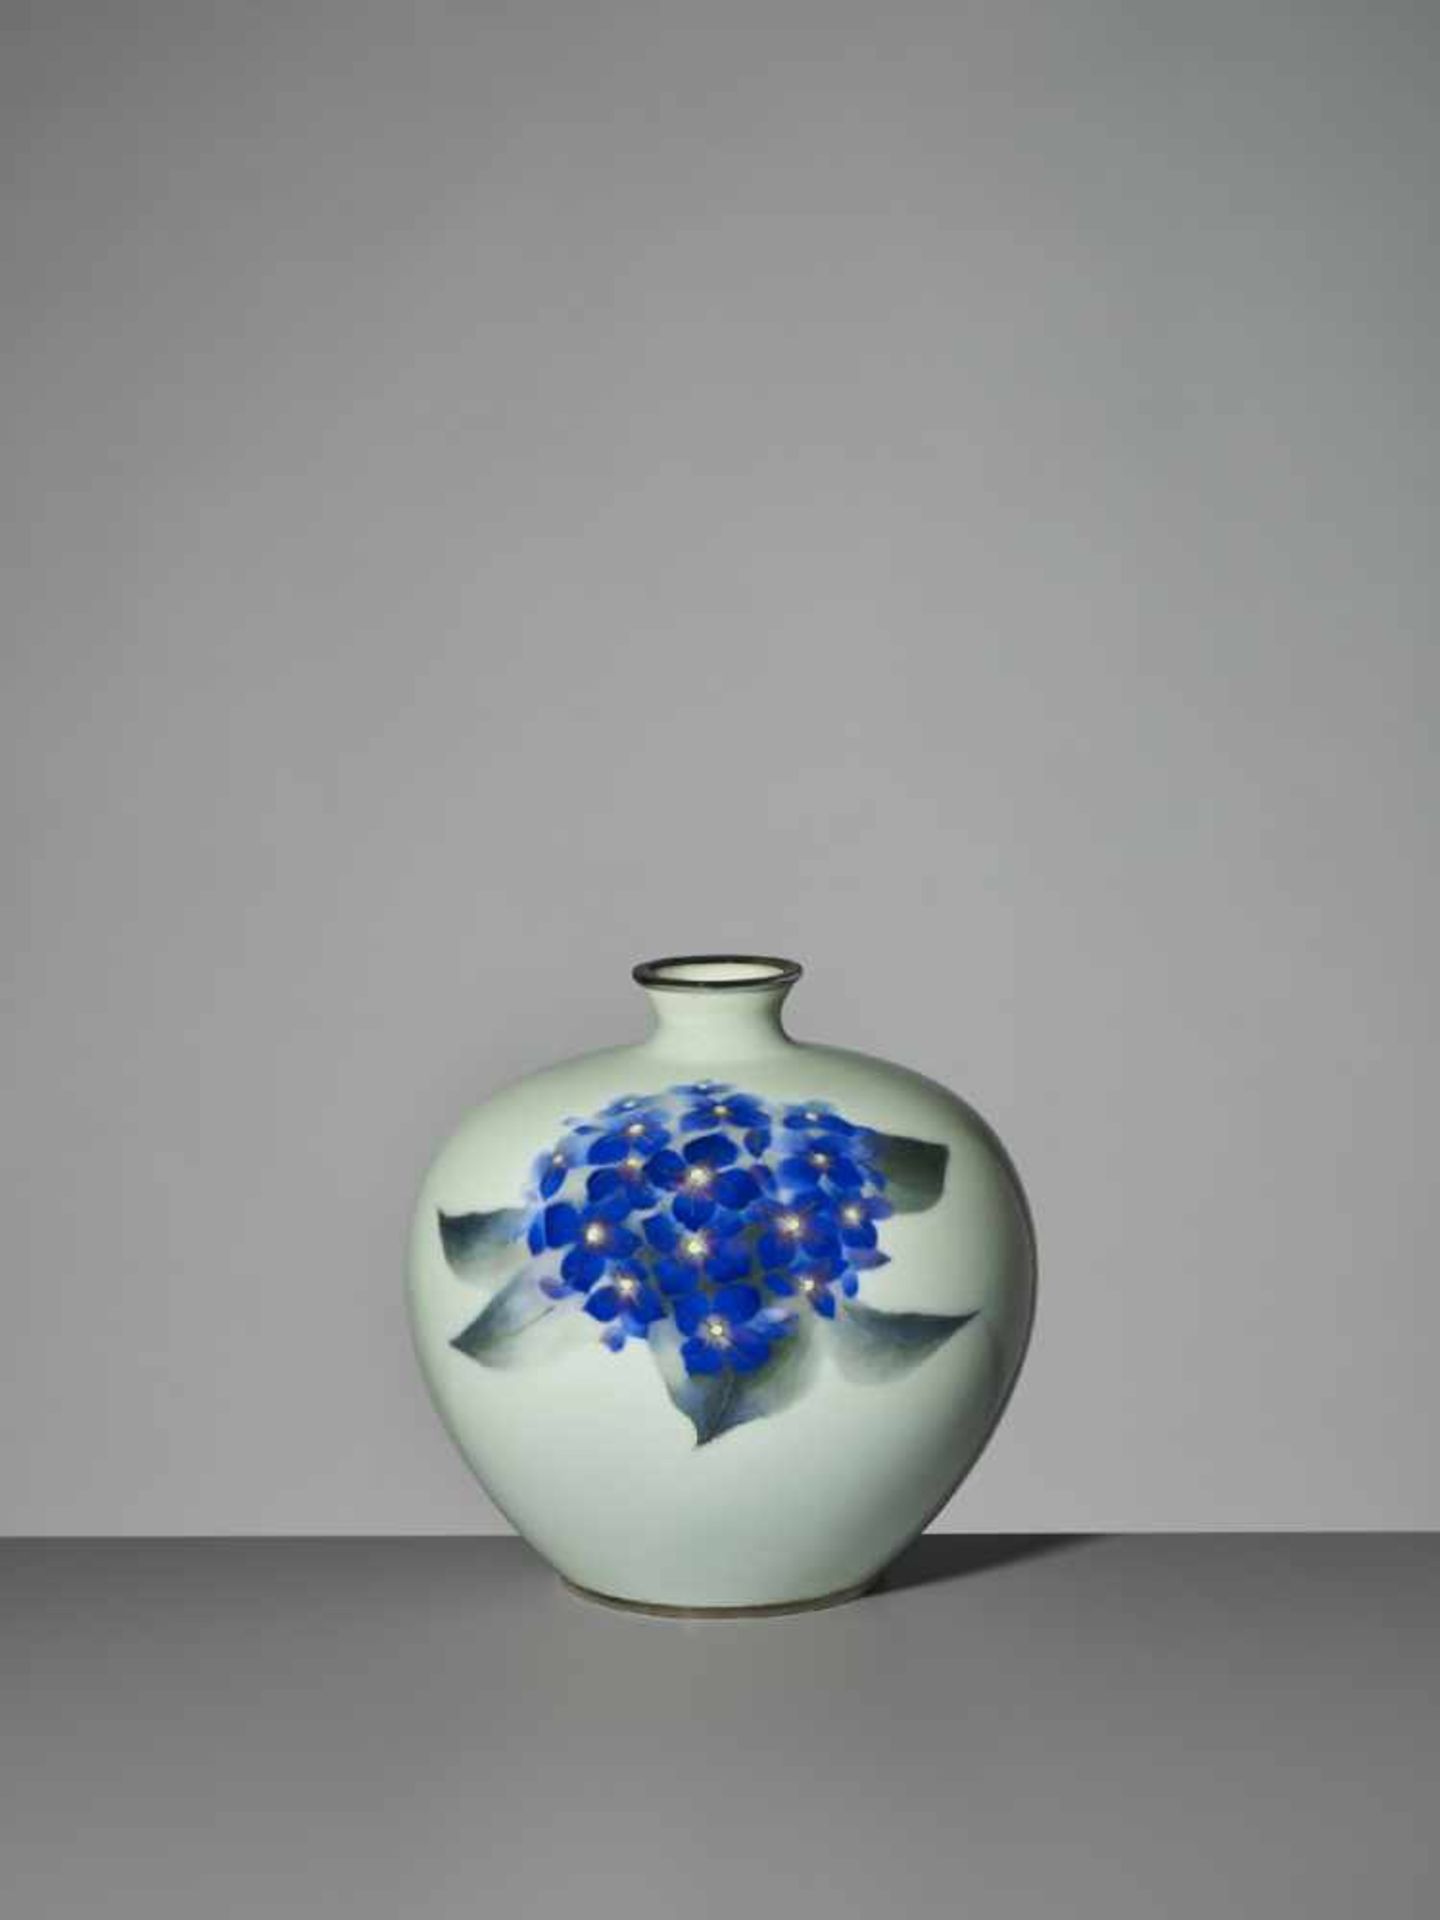 ANDO JUBEI: A FINE CLOISONNÉ ENAMEL VASE WITH VIOLETS By Ando Jubei (1876-1953), signed with the